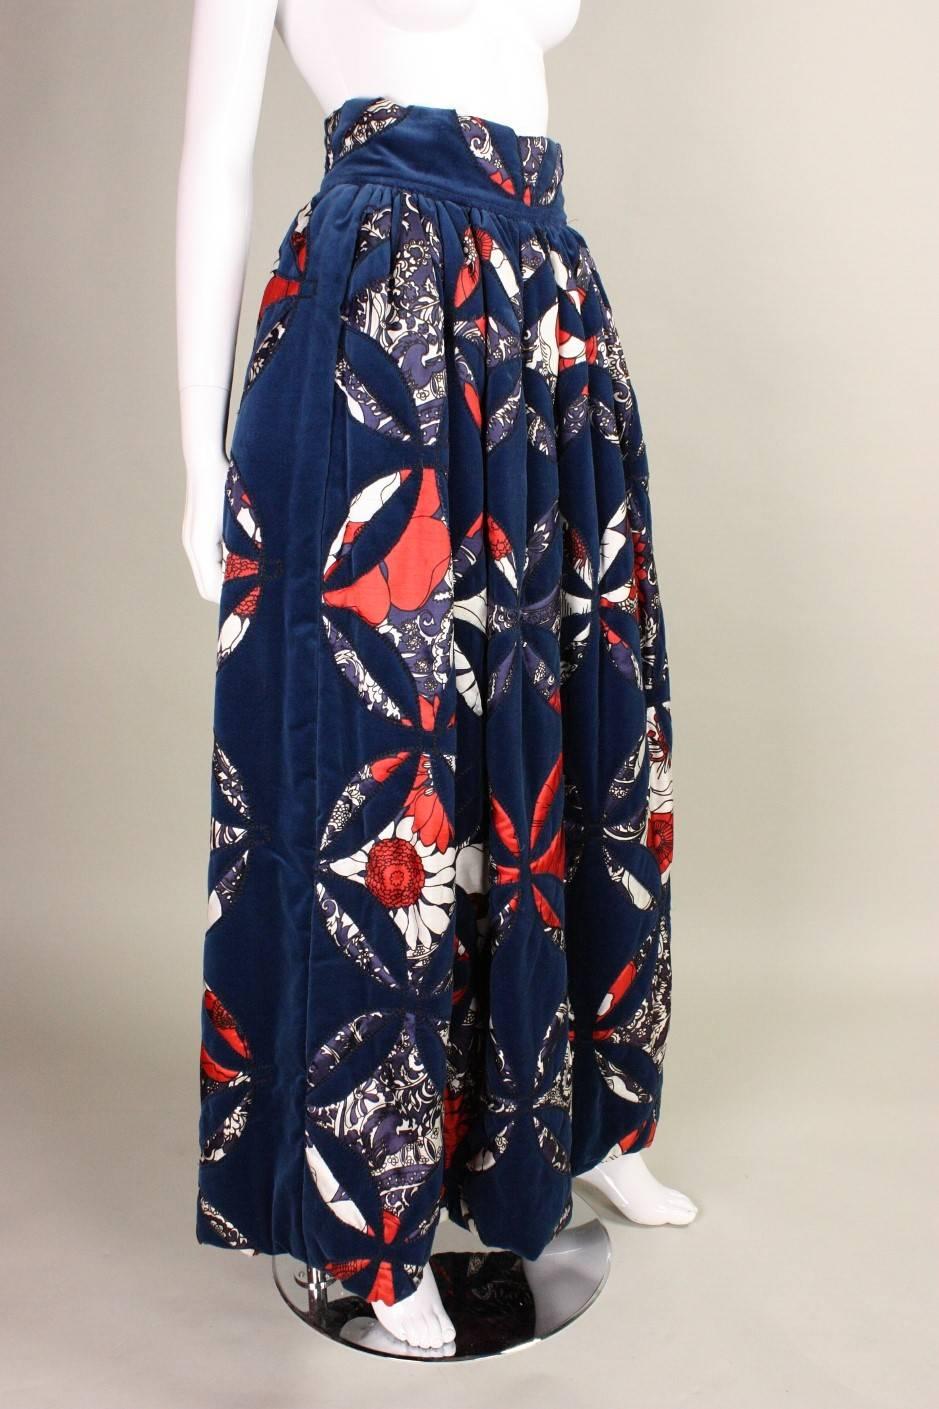 Vintage maxi skirt from Adolfo for Saks Fifth Avenue dates to the 1970's and is made of patchwork navy velvet.  Contrasting fabric features a graphic floral print.  Soutache trim along patchwork.  Wide waistband.  Fully lined.  Center back zippered